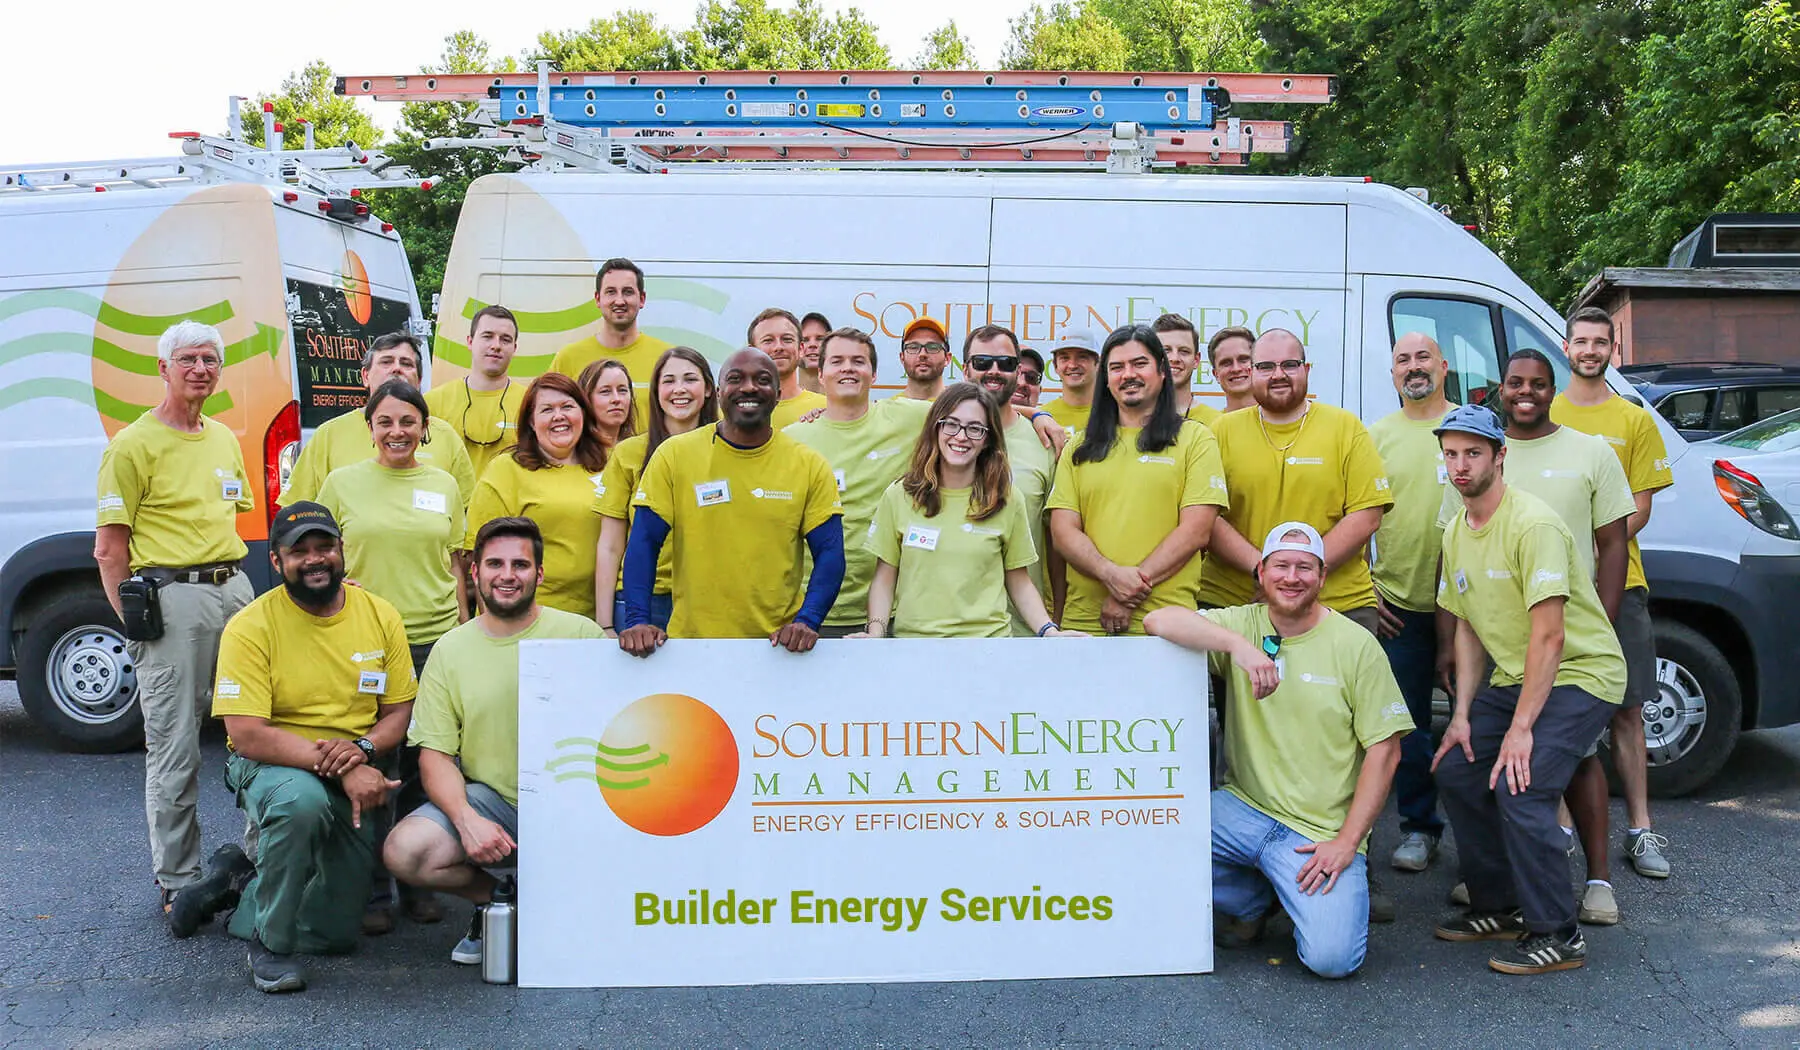 Southern Energy Management's Builder Energy Services team